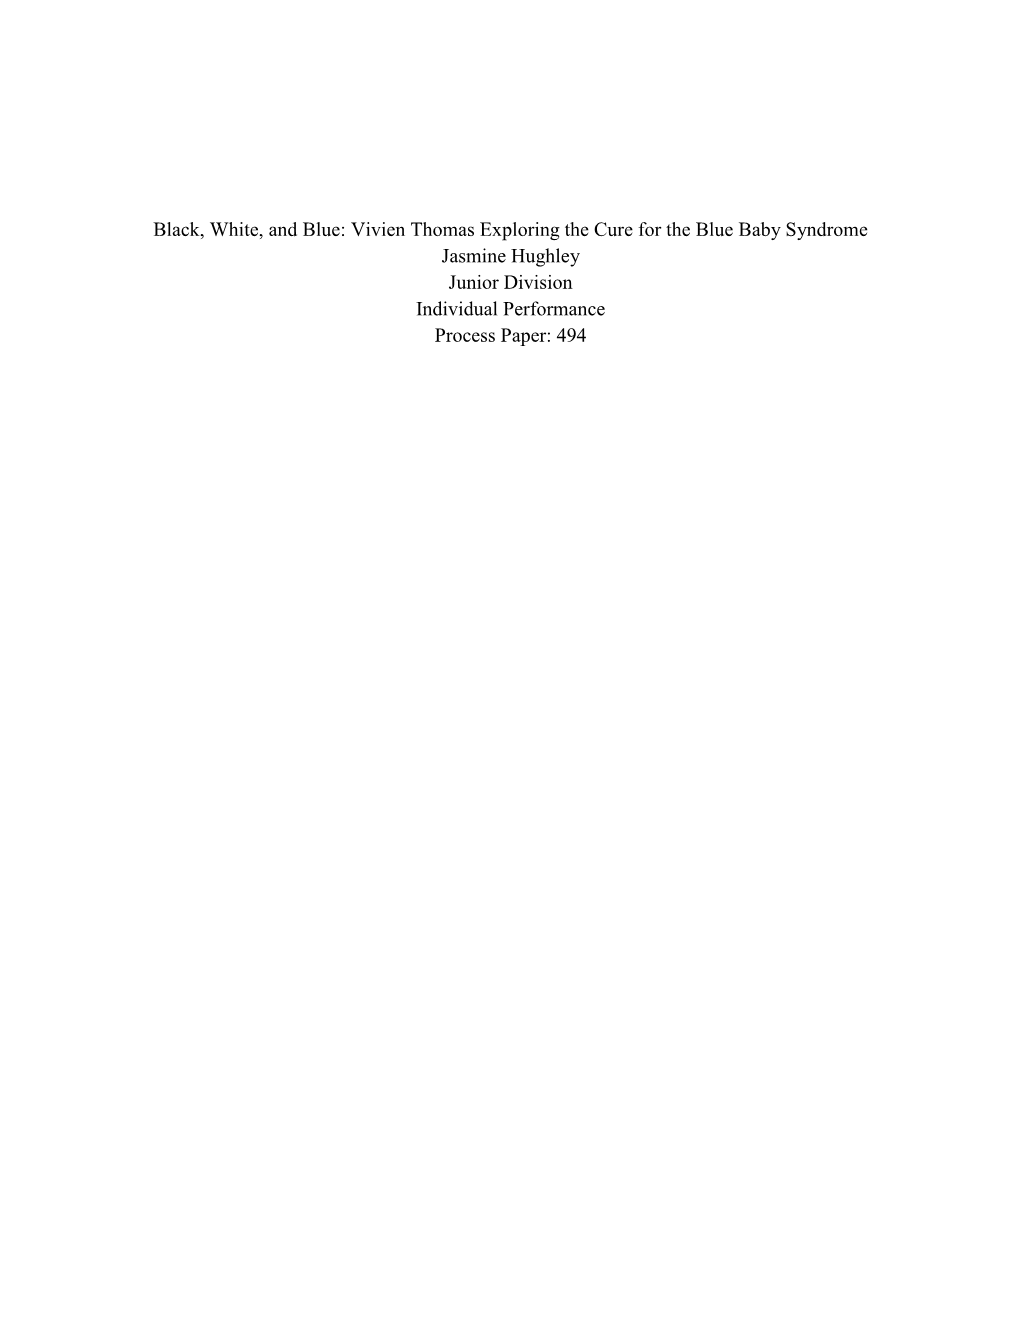 Black, White, and Blue: Vivien Thomas Exploring the Cure for the Blue Baby Syndrome Jasmine Hughley Junior Division Individual Performance Process Paper: 494